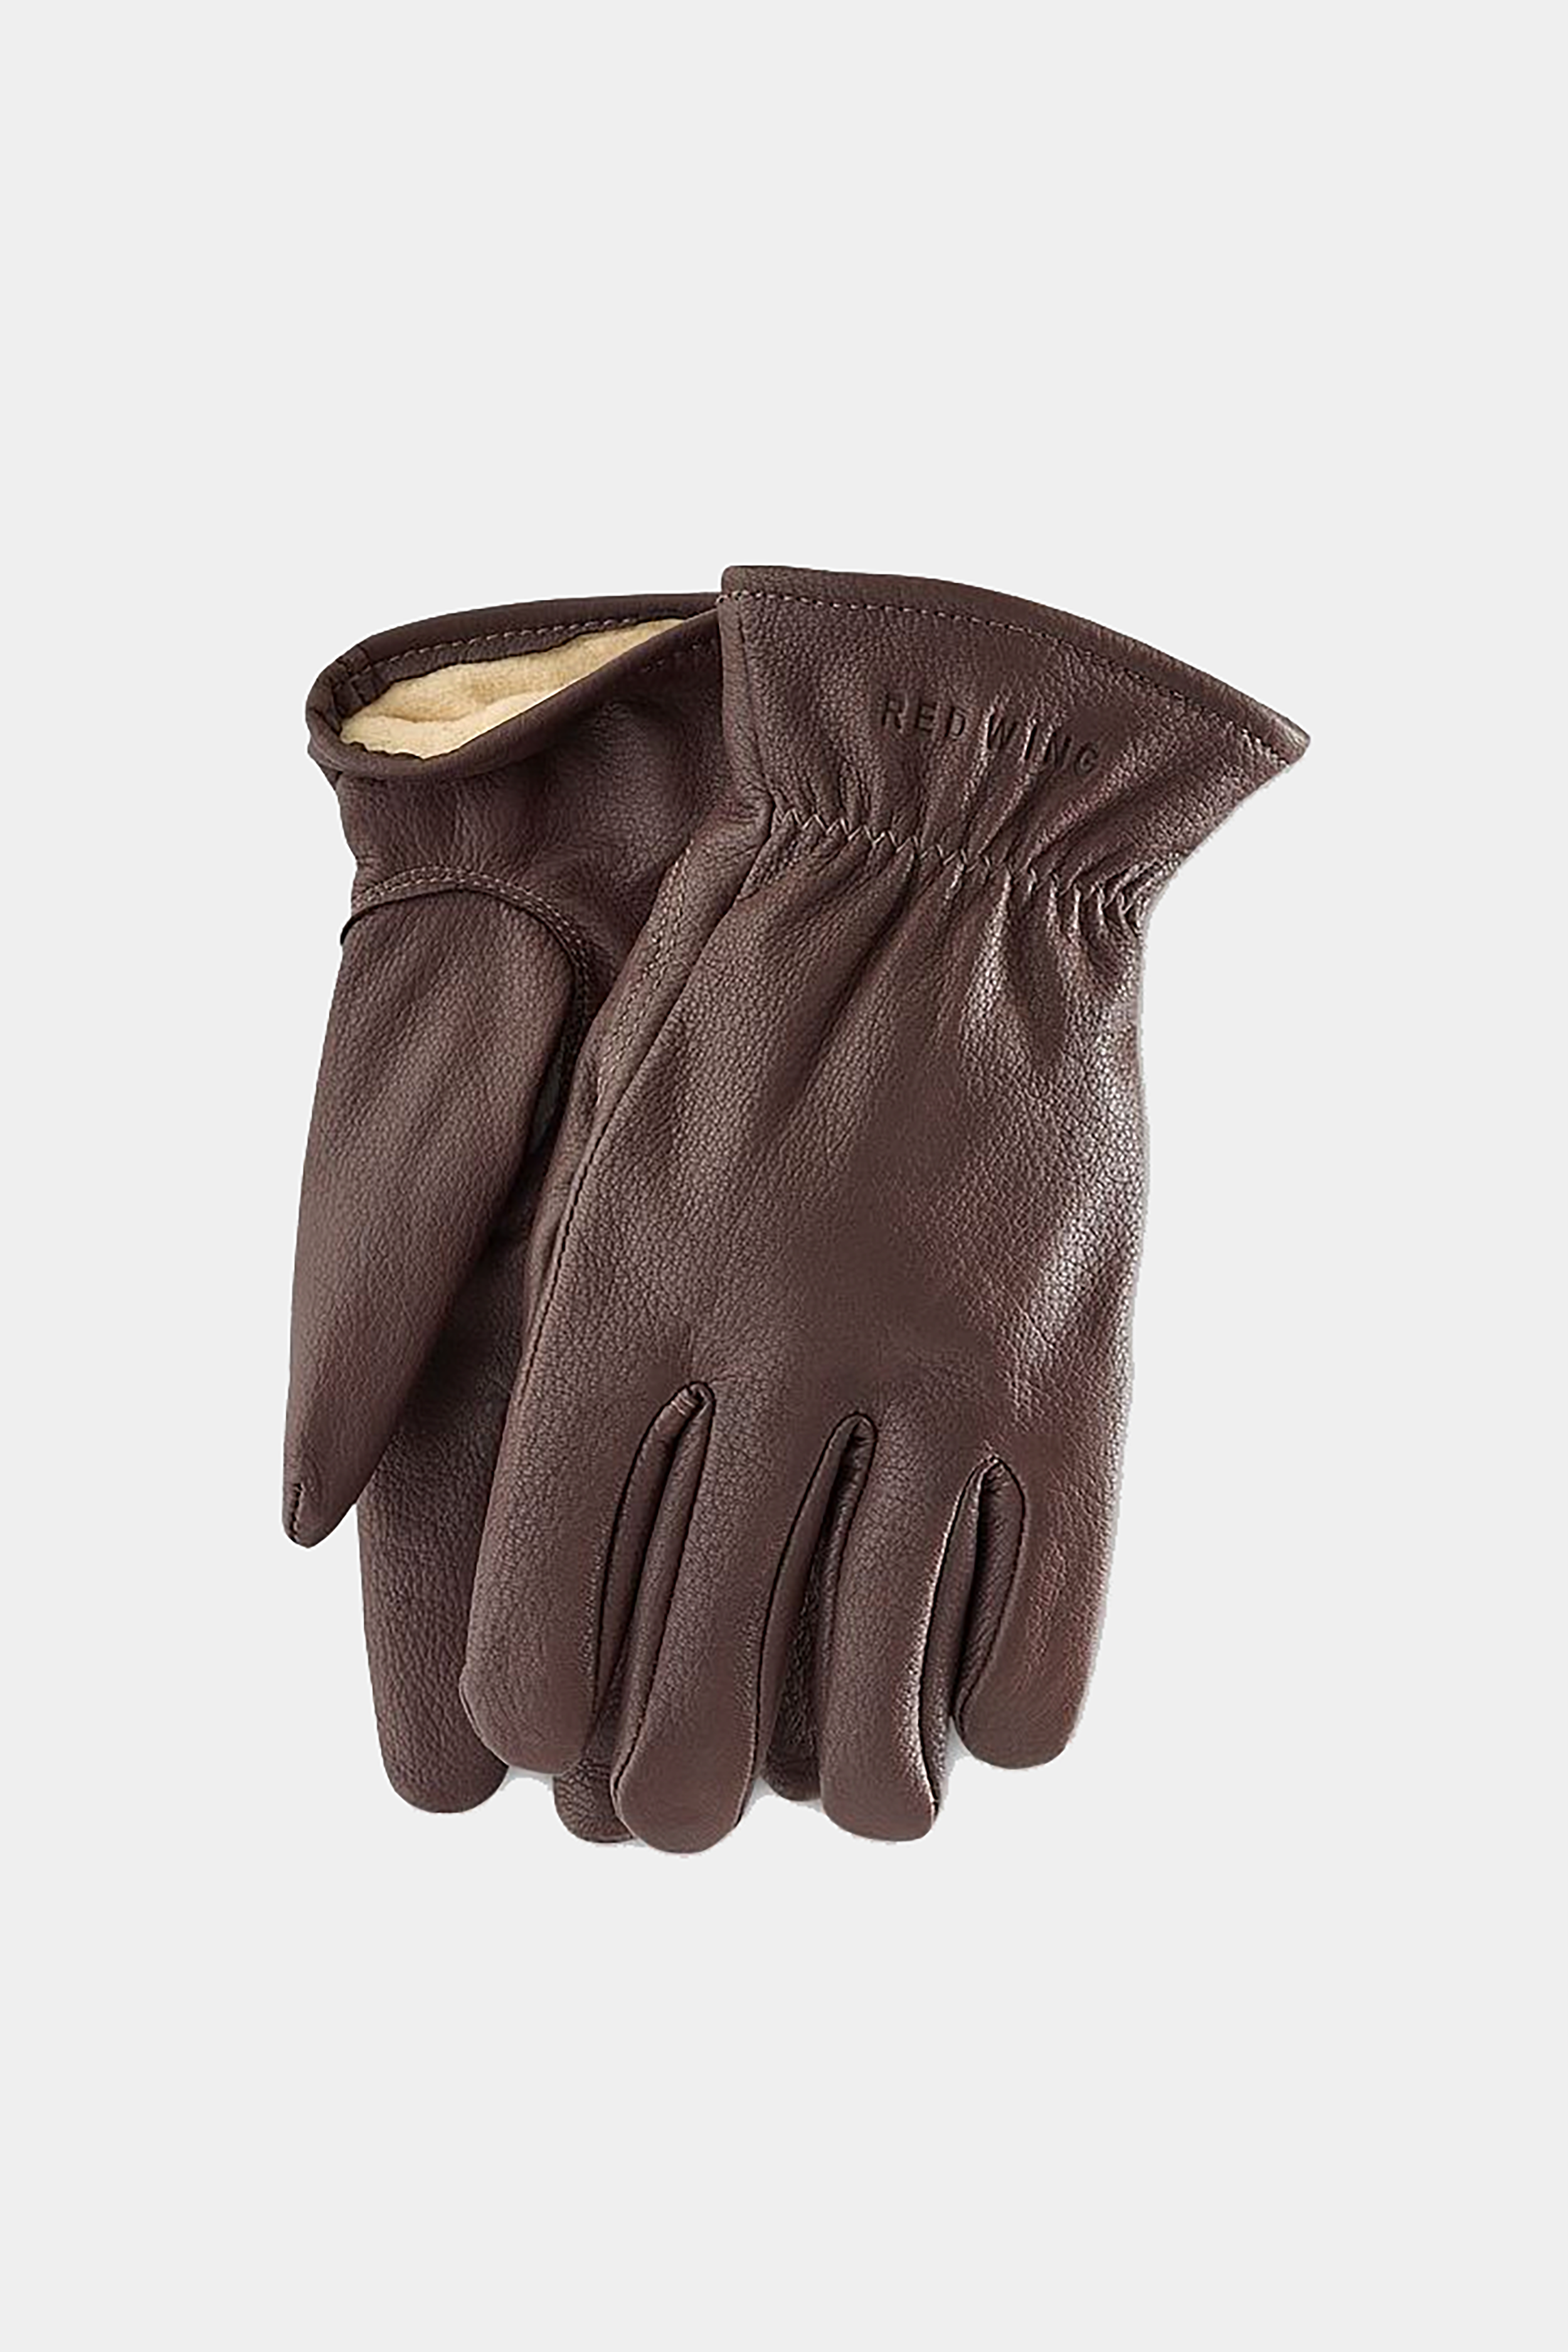 Red Wing Lined Buckskin Gloves in Brown